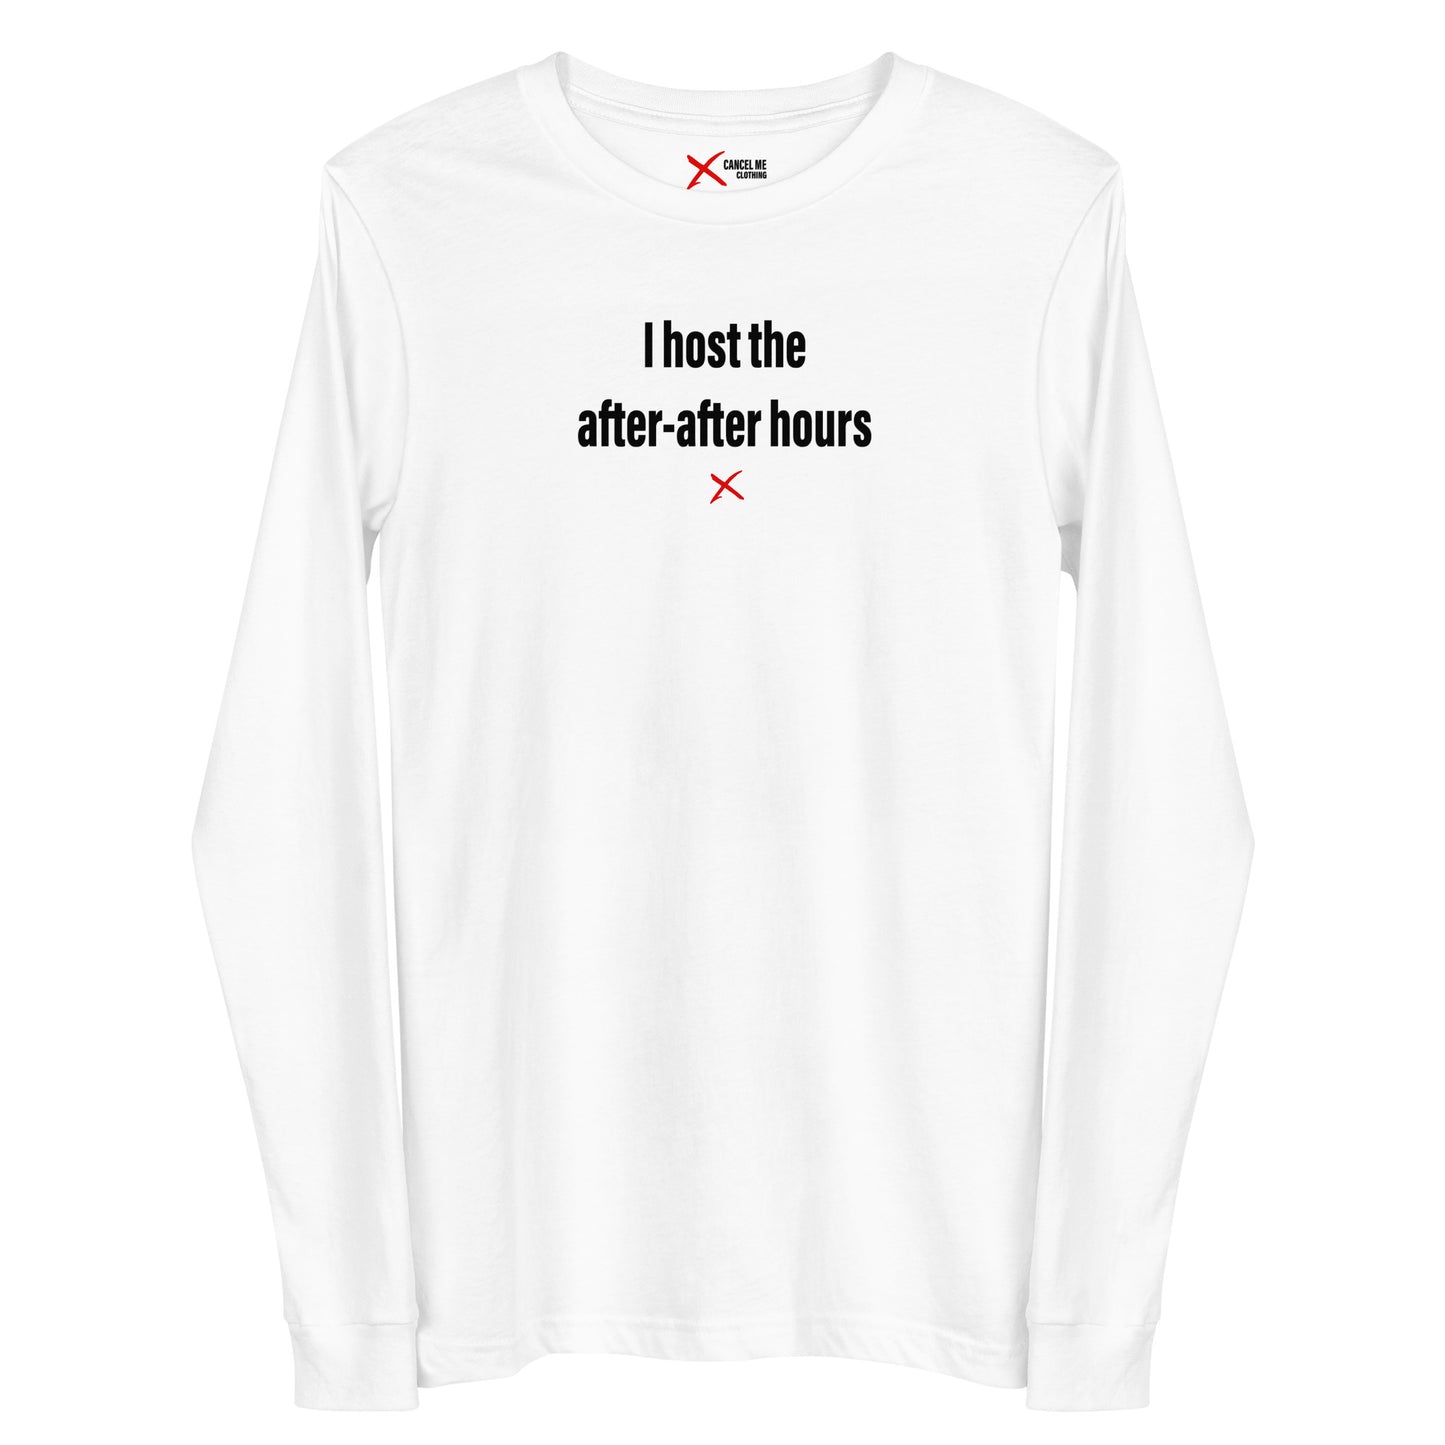 I host the after-after hours - Longsleeve